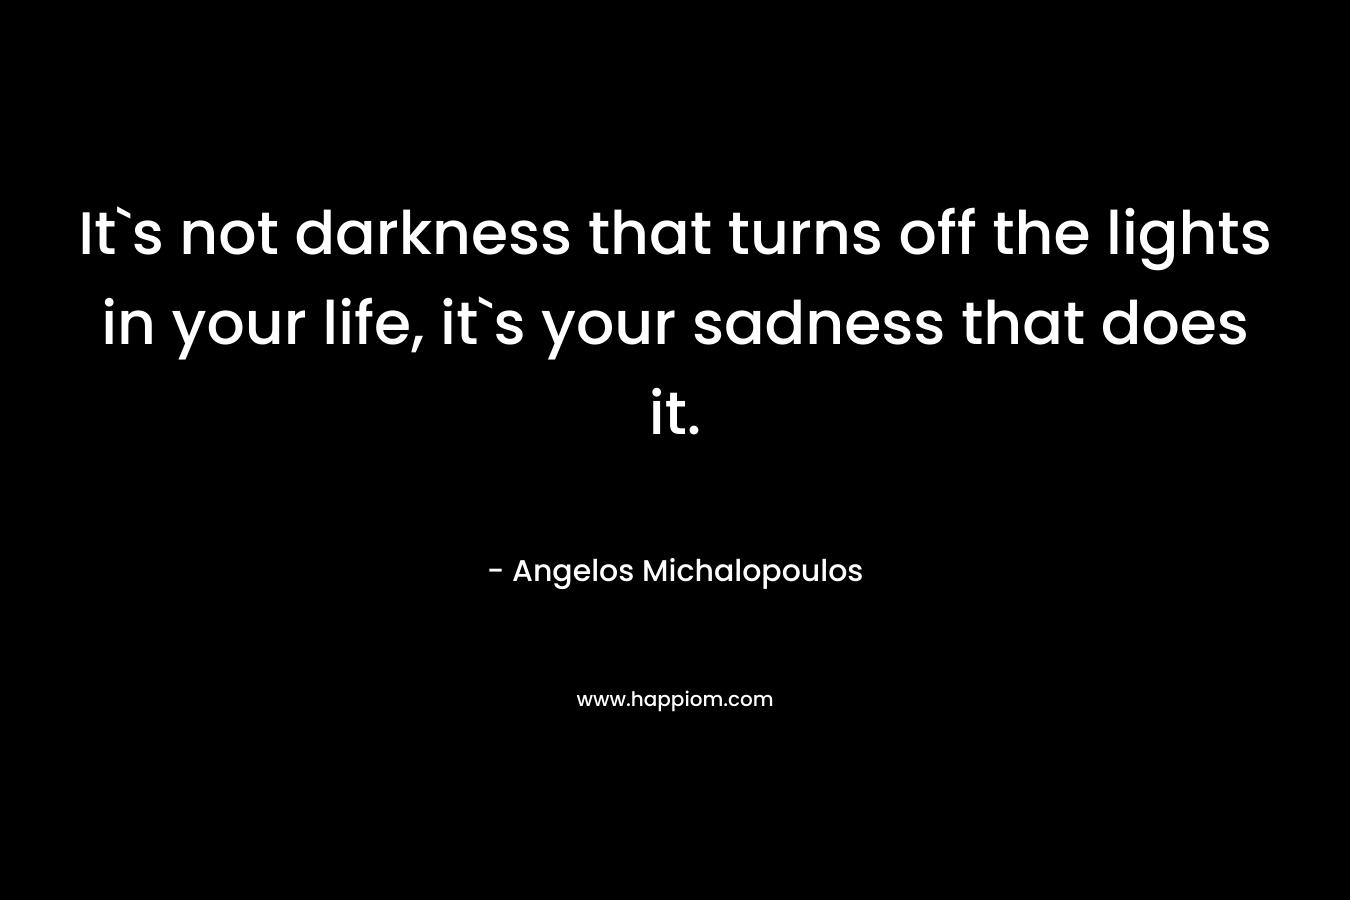 It`s not darkness that turns off the lights in your life, it`s your sadness that does it. – Angelos Michalopoulos